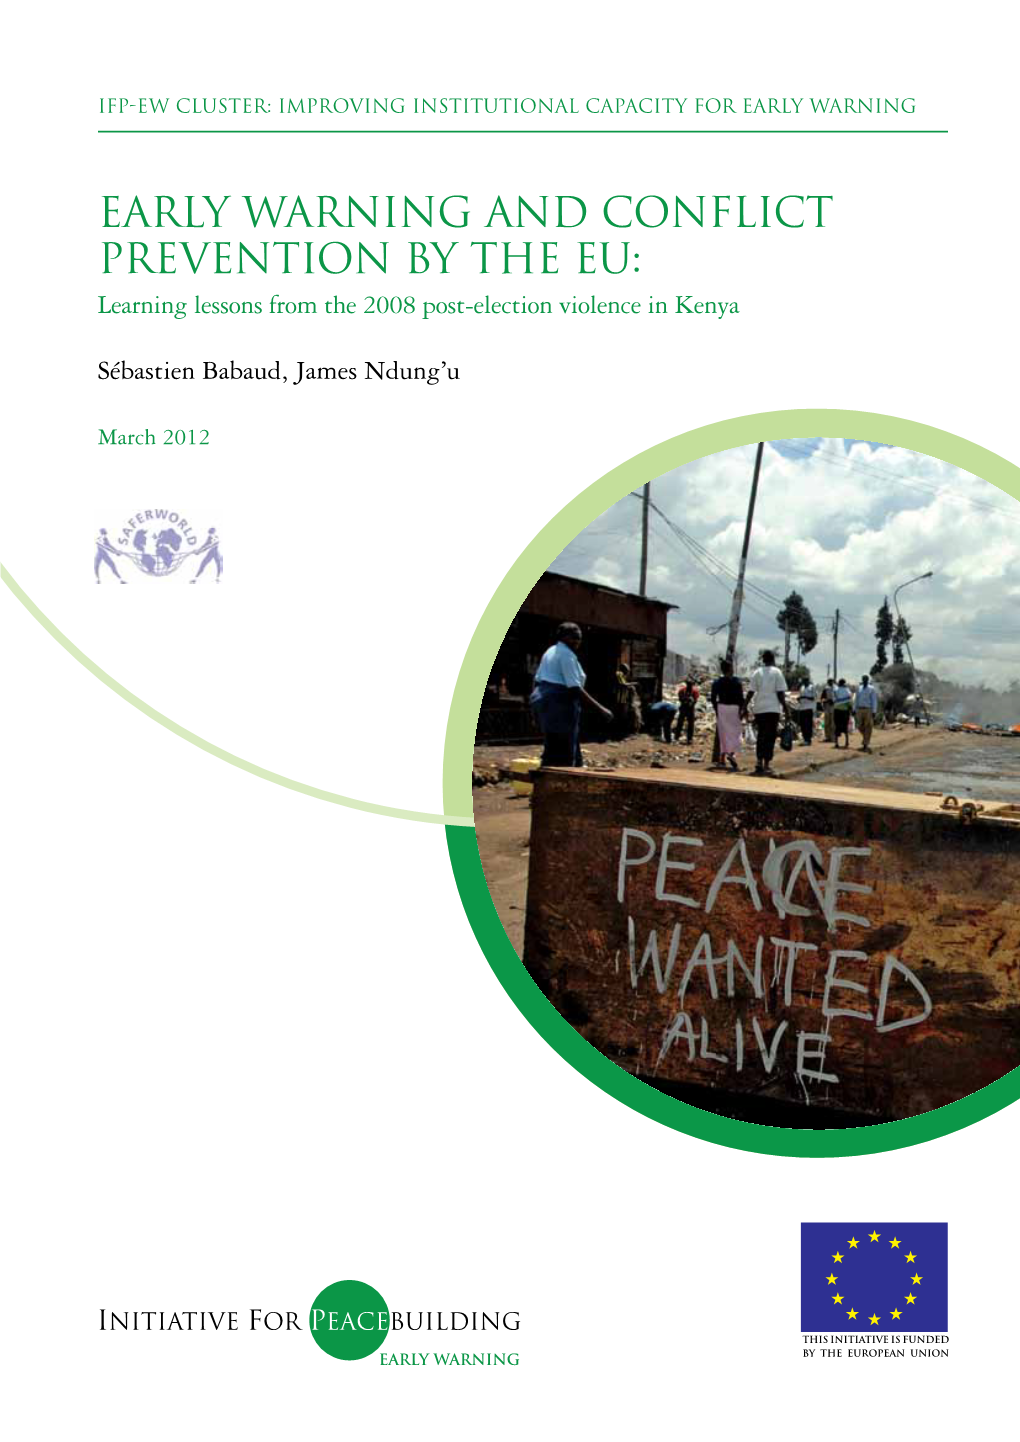 Early Warning and Conflict Prevention by the EU: Learning Lessons from the 2008 Post-Election Violence in Kenya